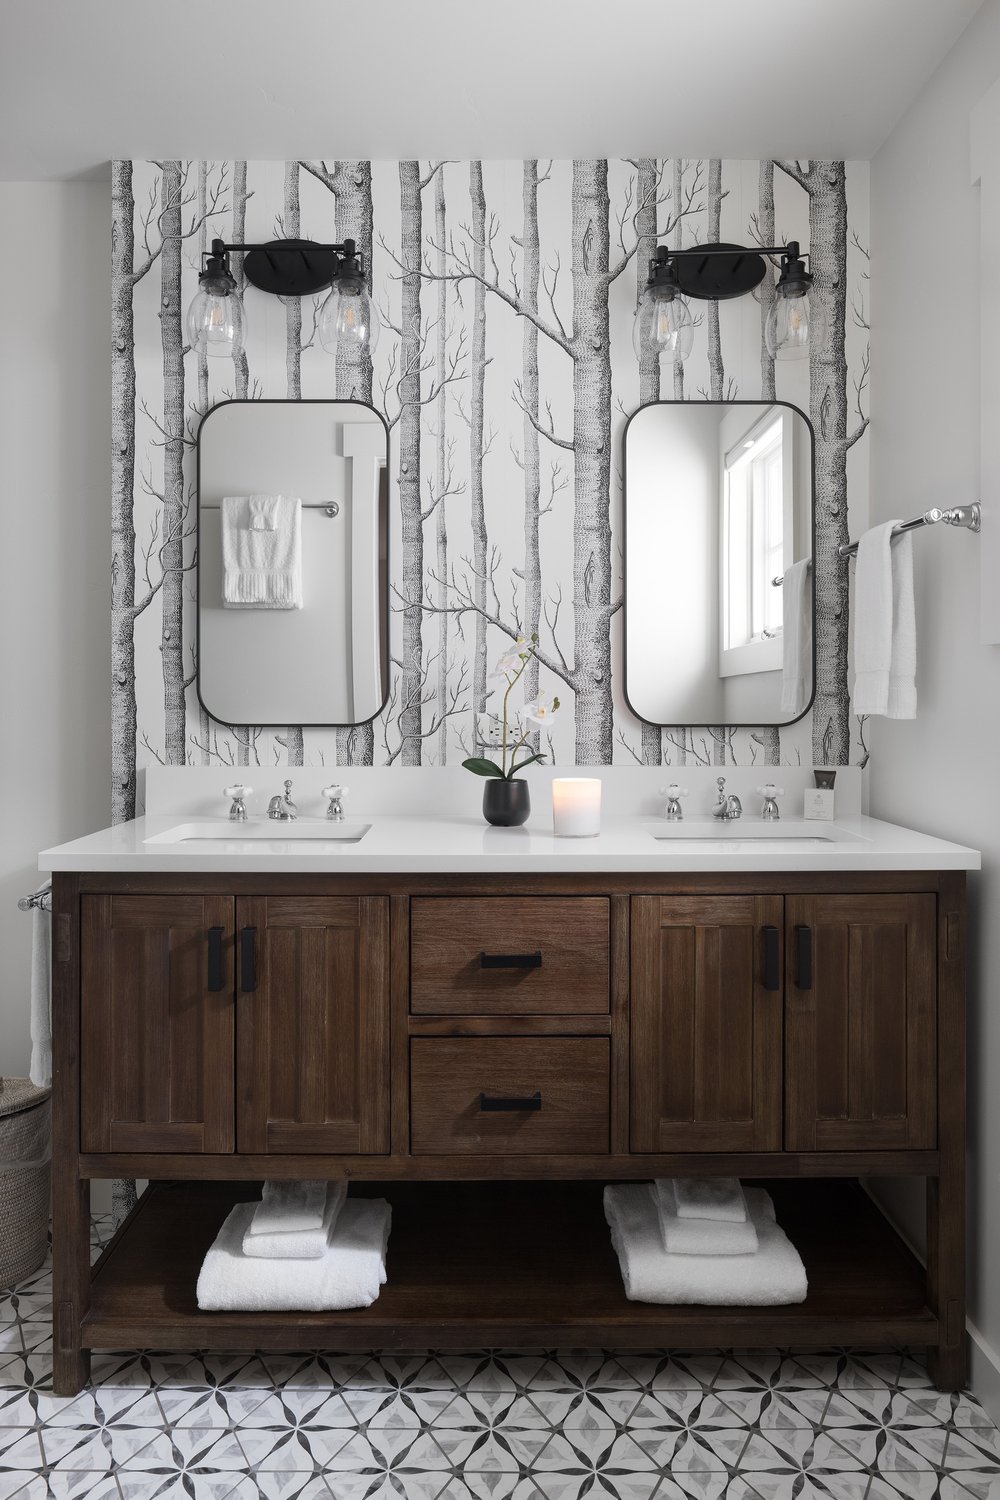 Bathroom double sink with two mirrors, a vanity, and woods wallpaper